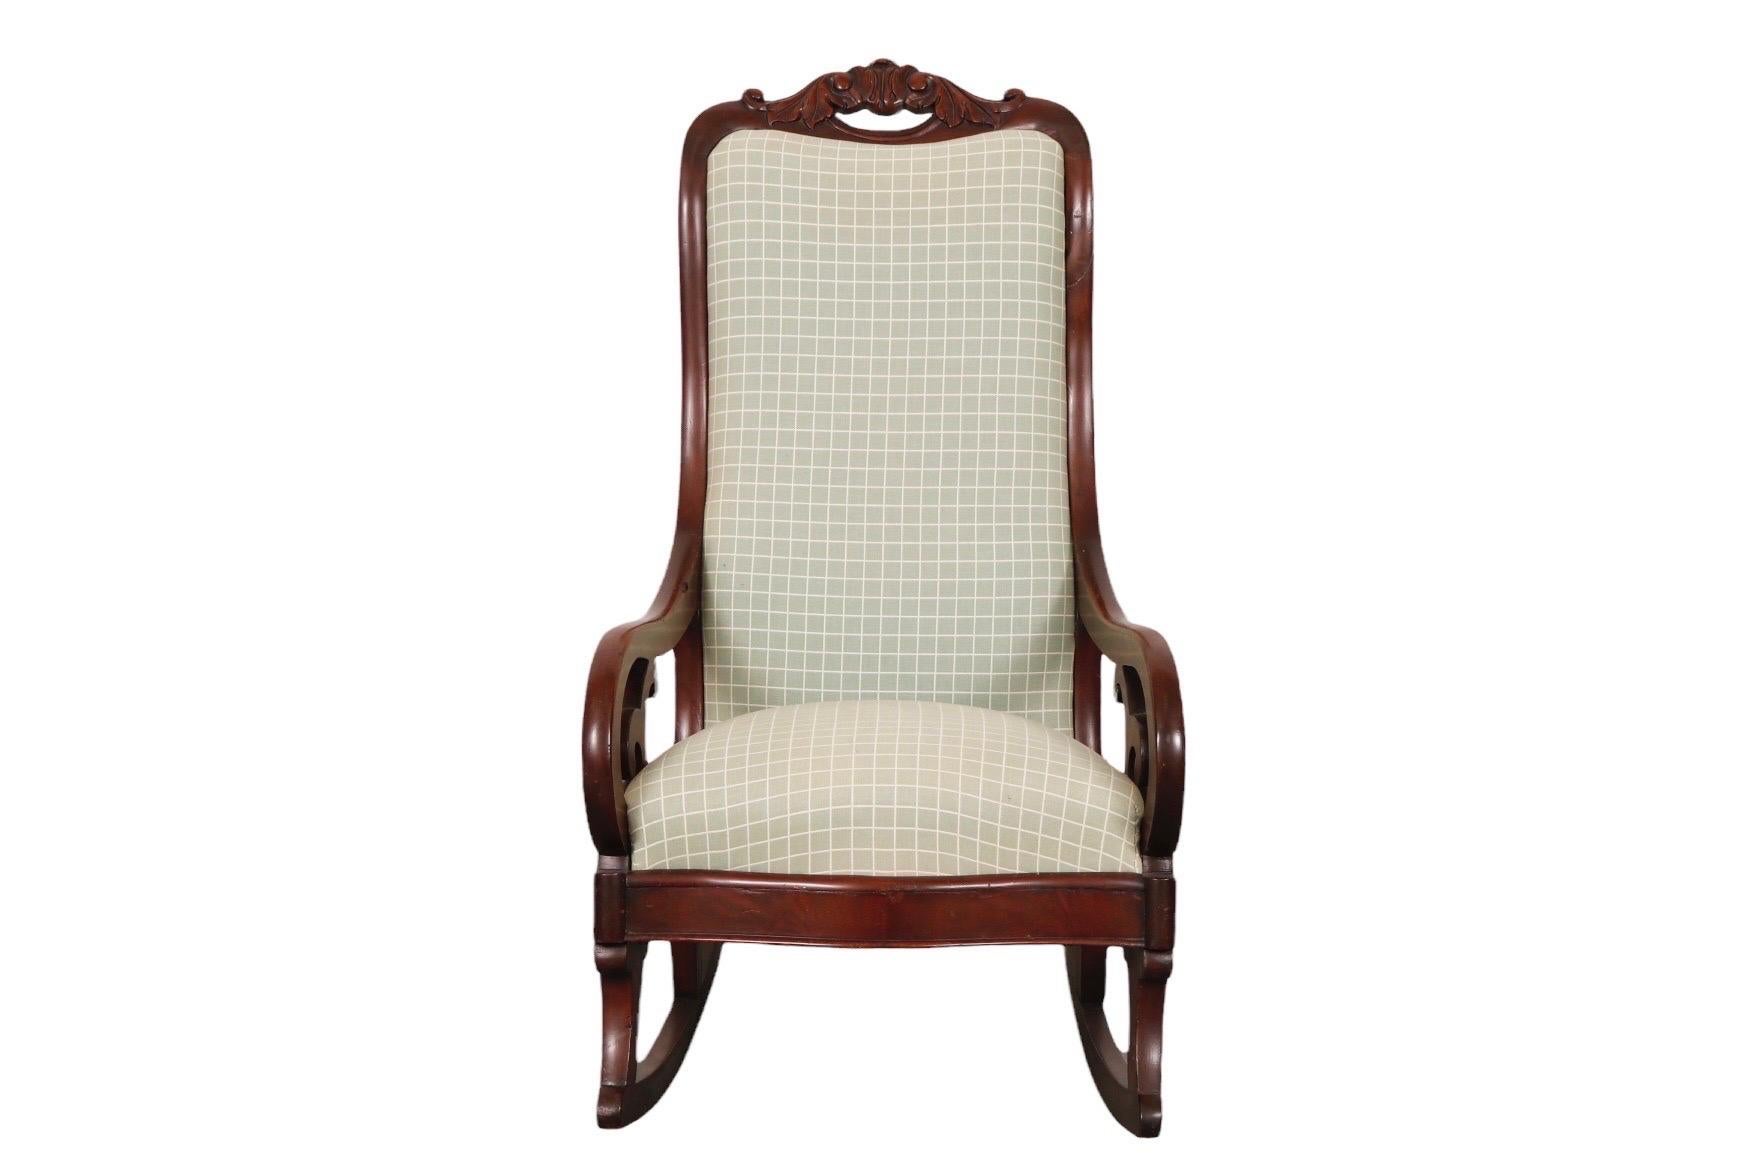 A Biedermeier rocking chair made of mahogany. Carved with a pierced, scrolled acanthus crest rail and scrolled arms, the seat back has a serpentine curved edge mirrored in the bow front skirt. Upholstered in a sage green fabric with a white grid